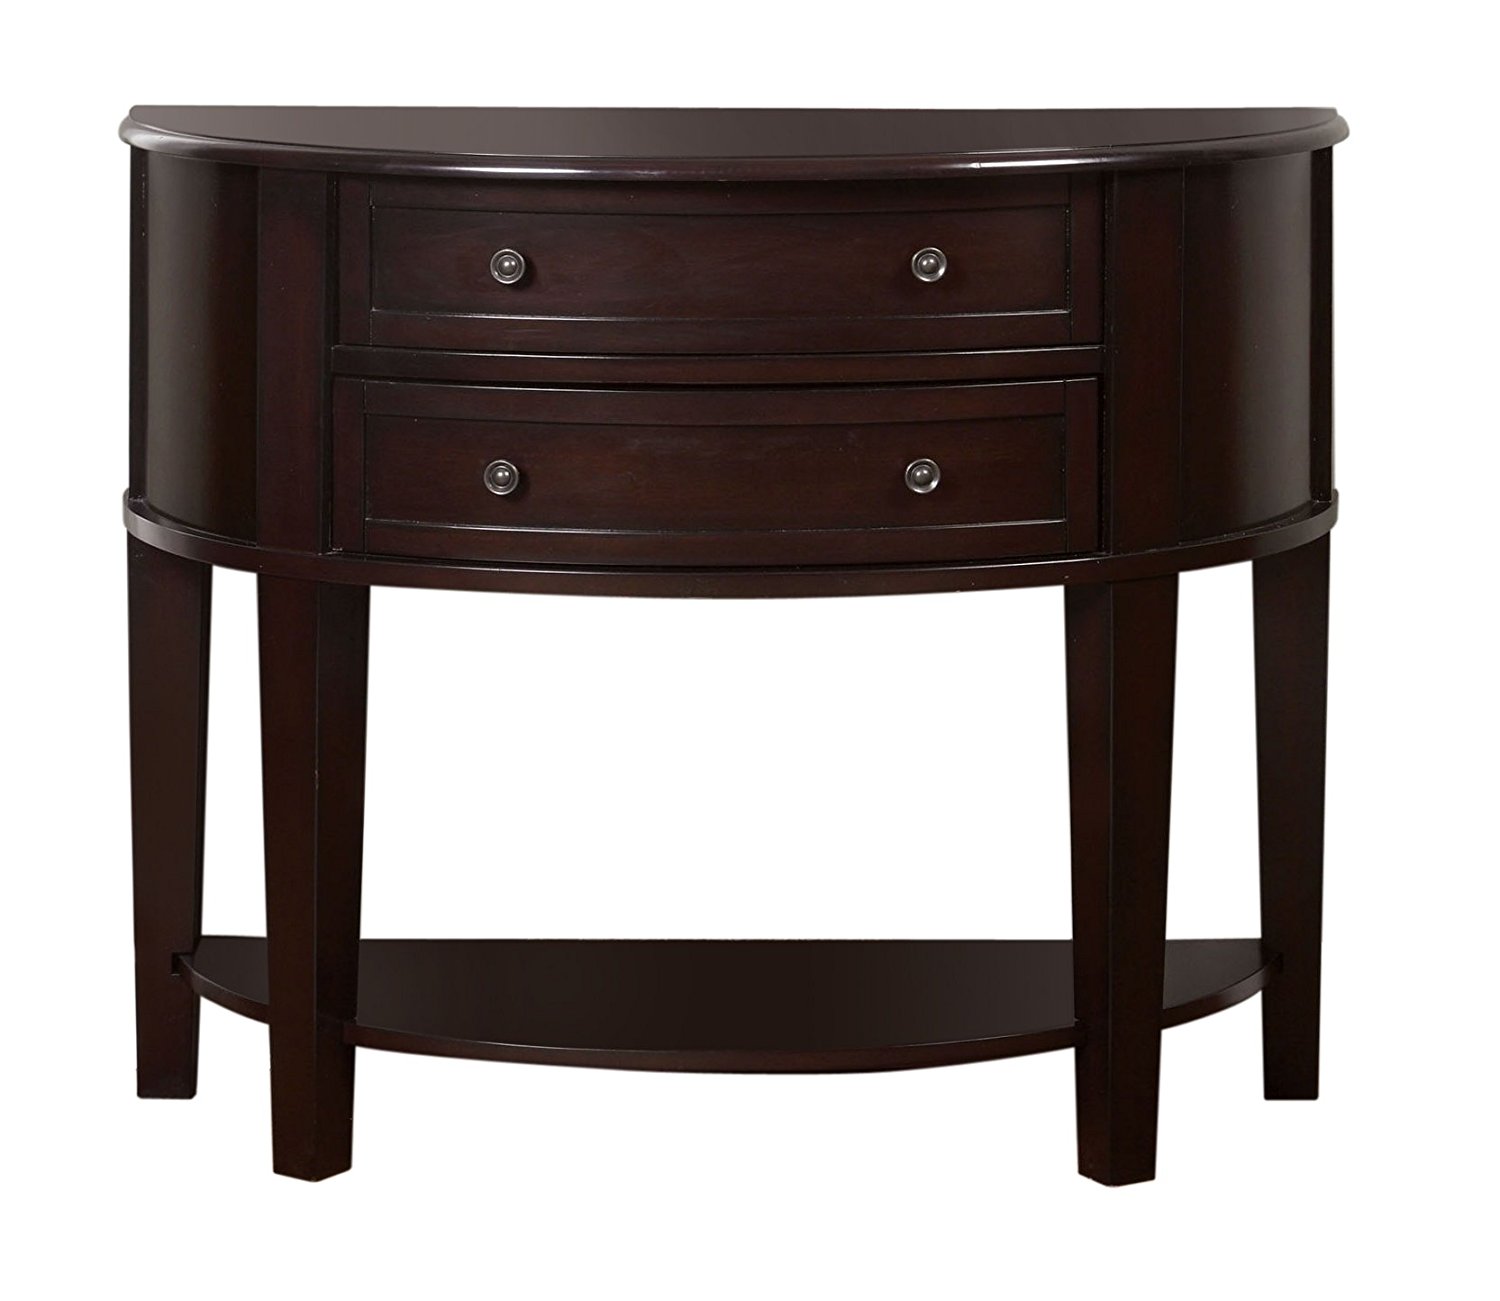 half round foyer table circle side semi arelis furniture moon small entry glass with black accent restaurant lamps battery operated big lots computer desk media storage end dale